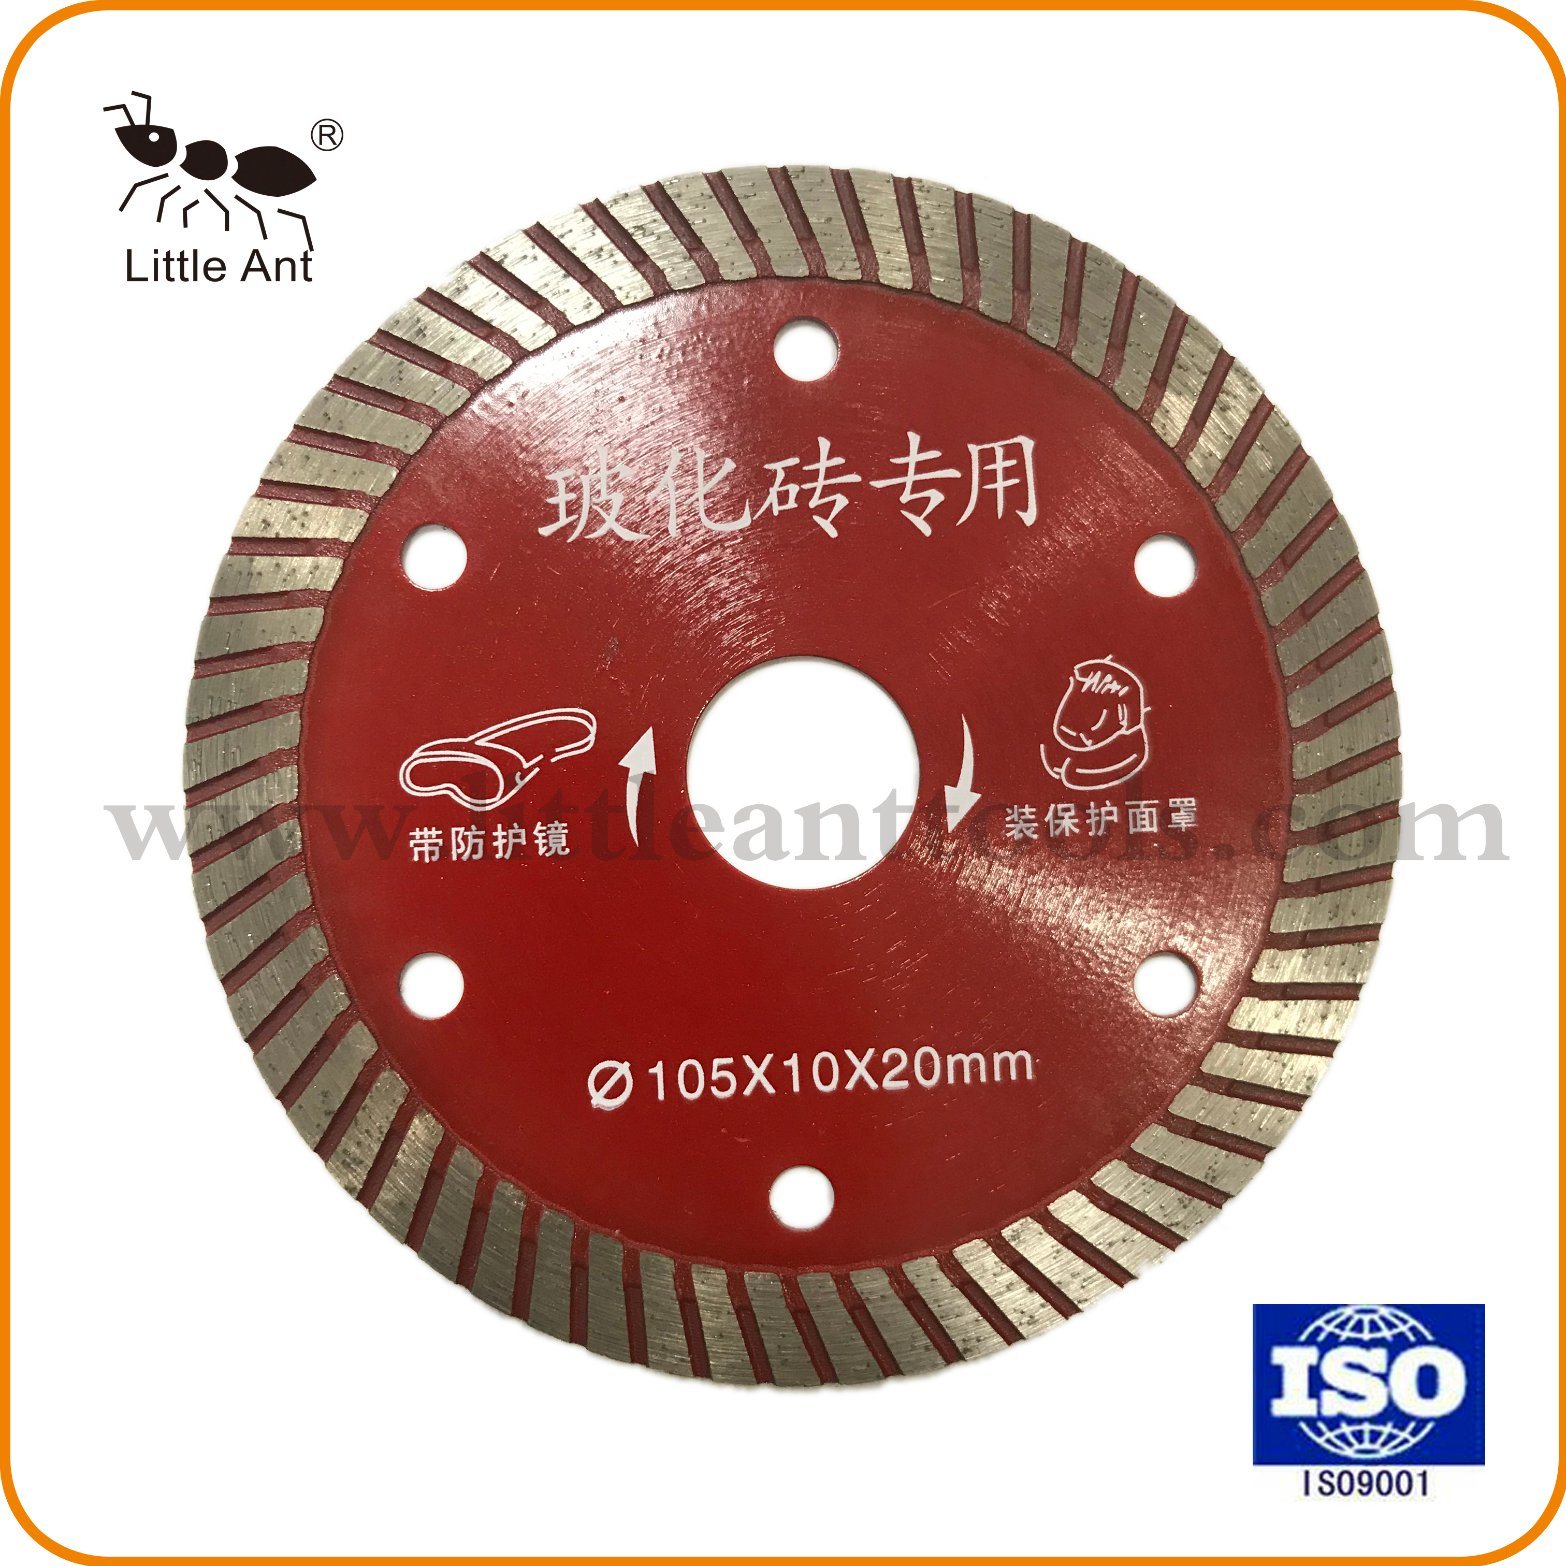 105mm Thin Sintered Continuous Rim Turbo Blade Diamond Saw Blade for Tile